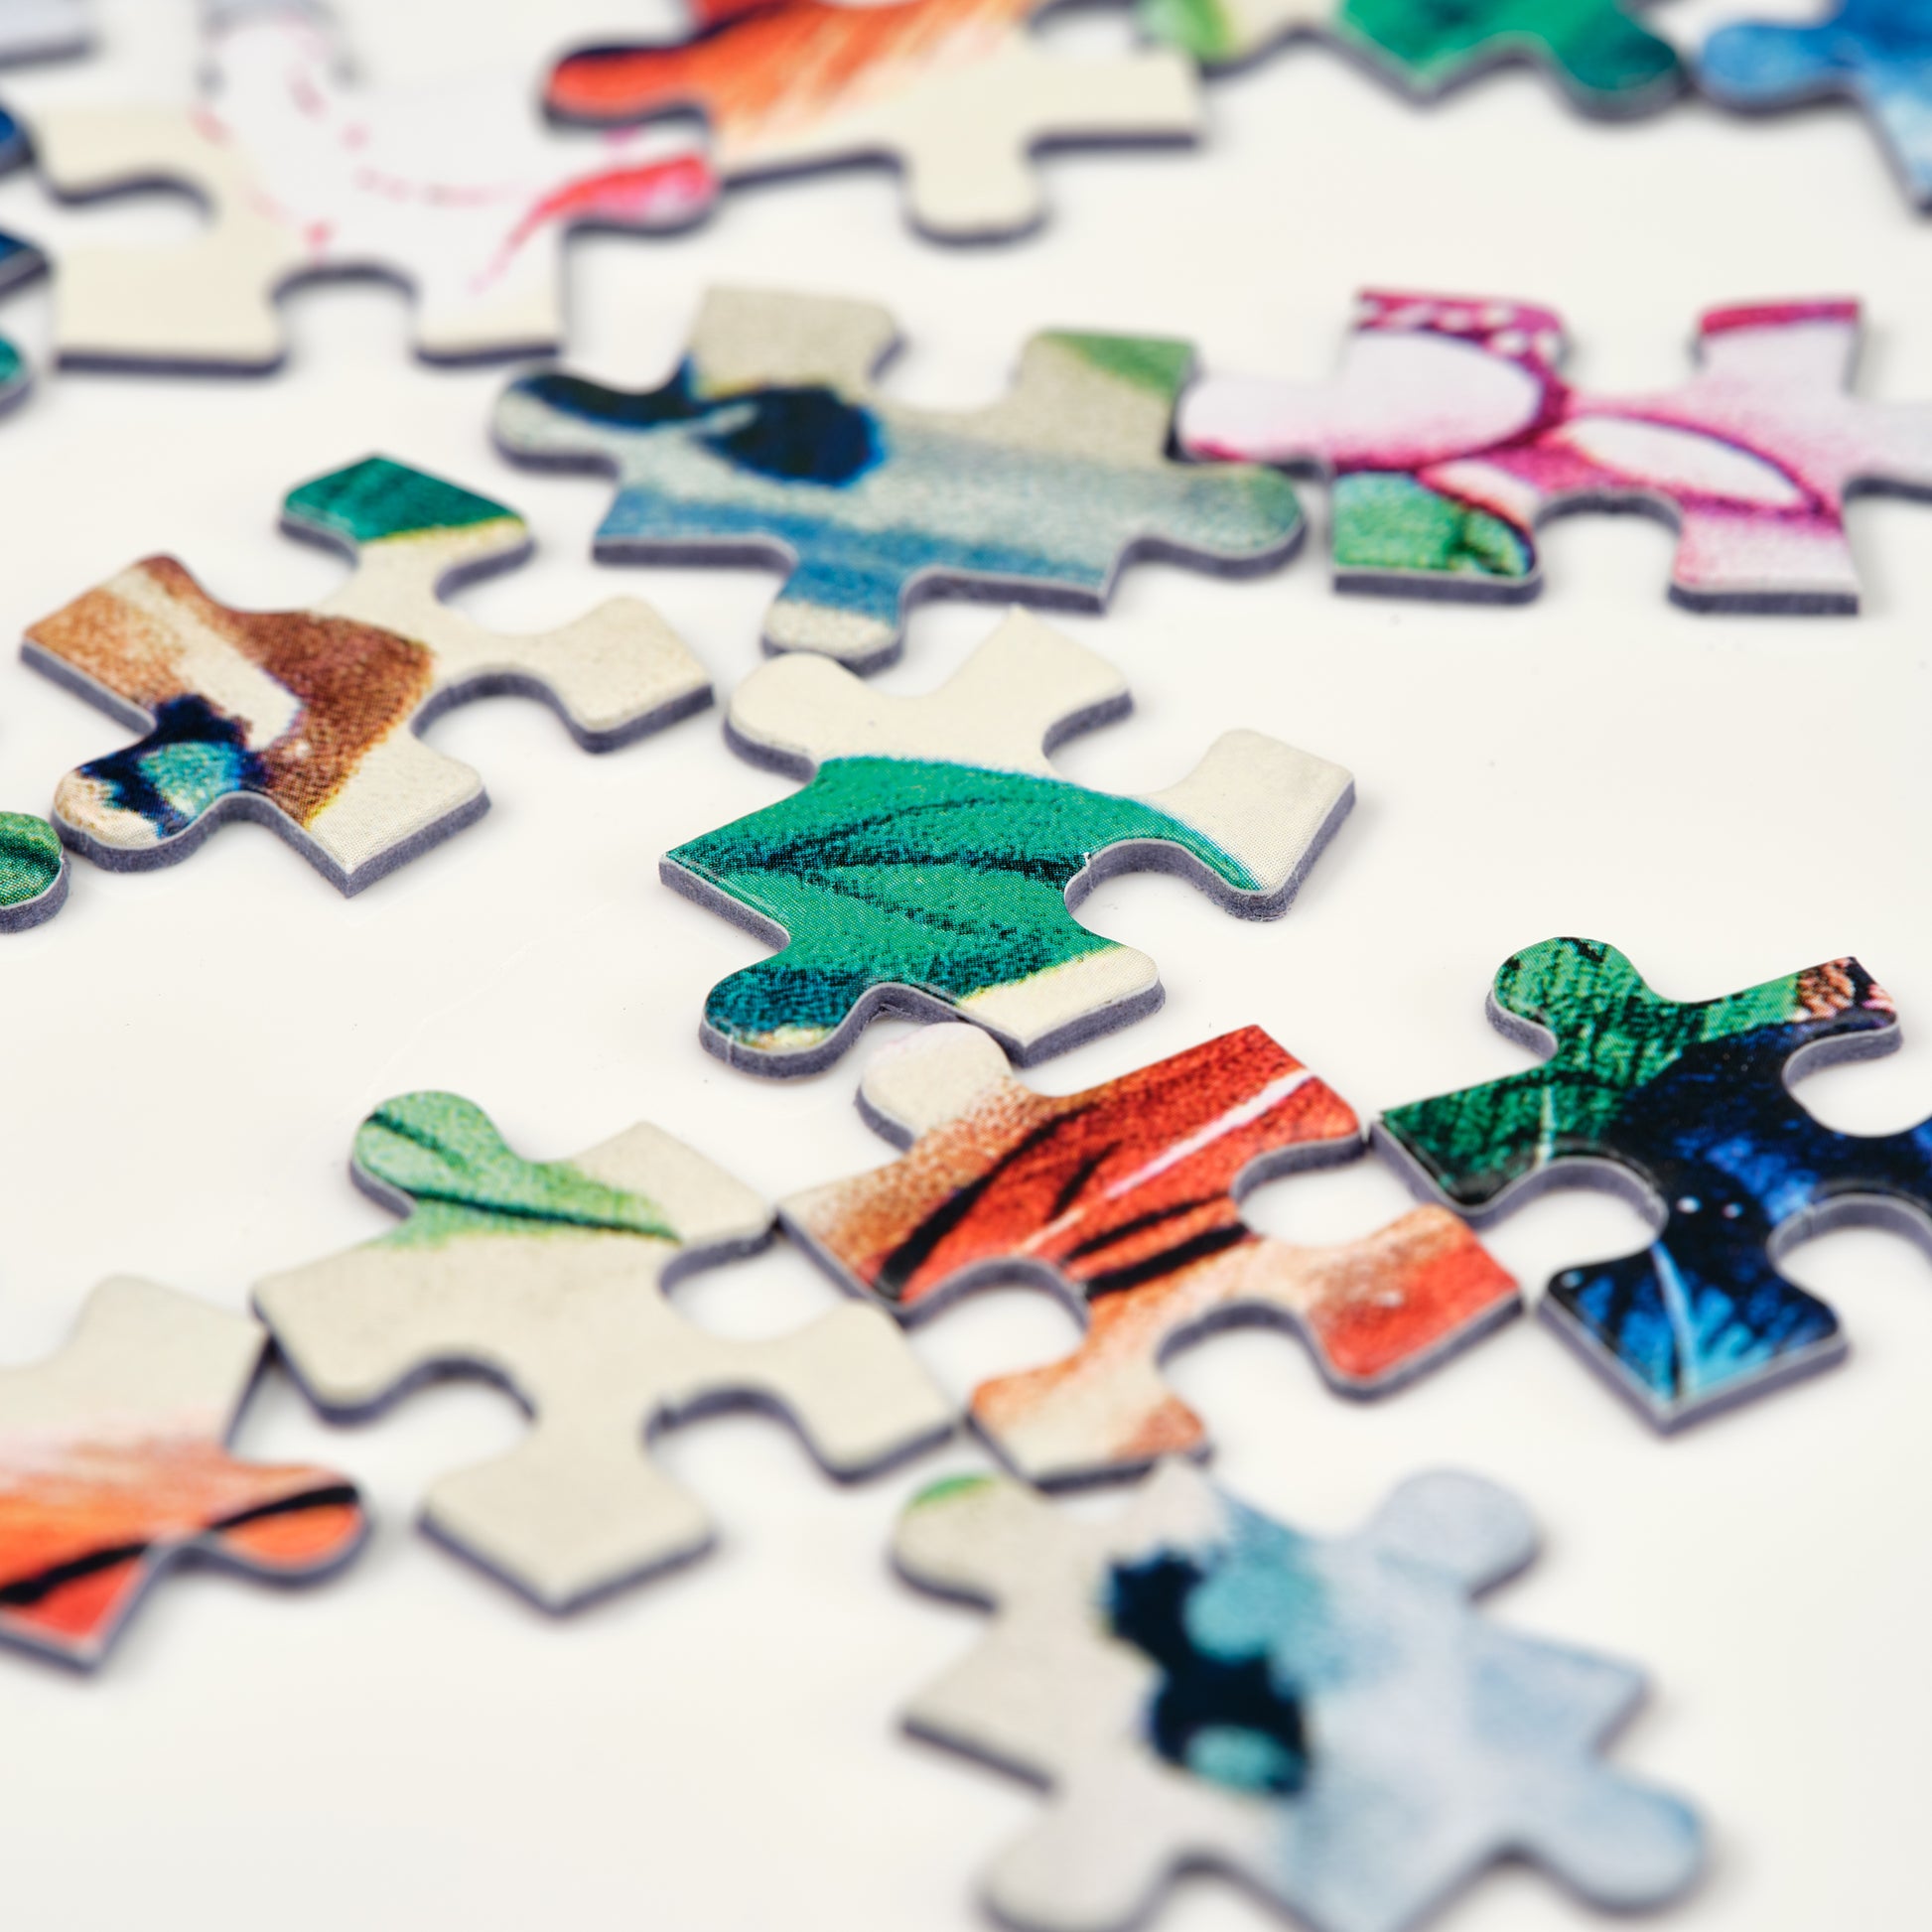 A close up of jigsaw pieces laid out on a white surface.